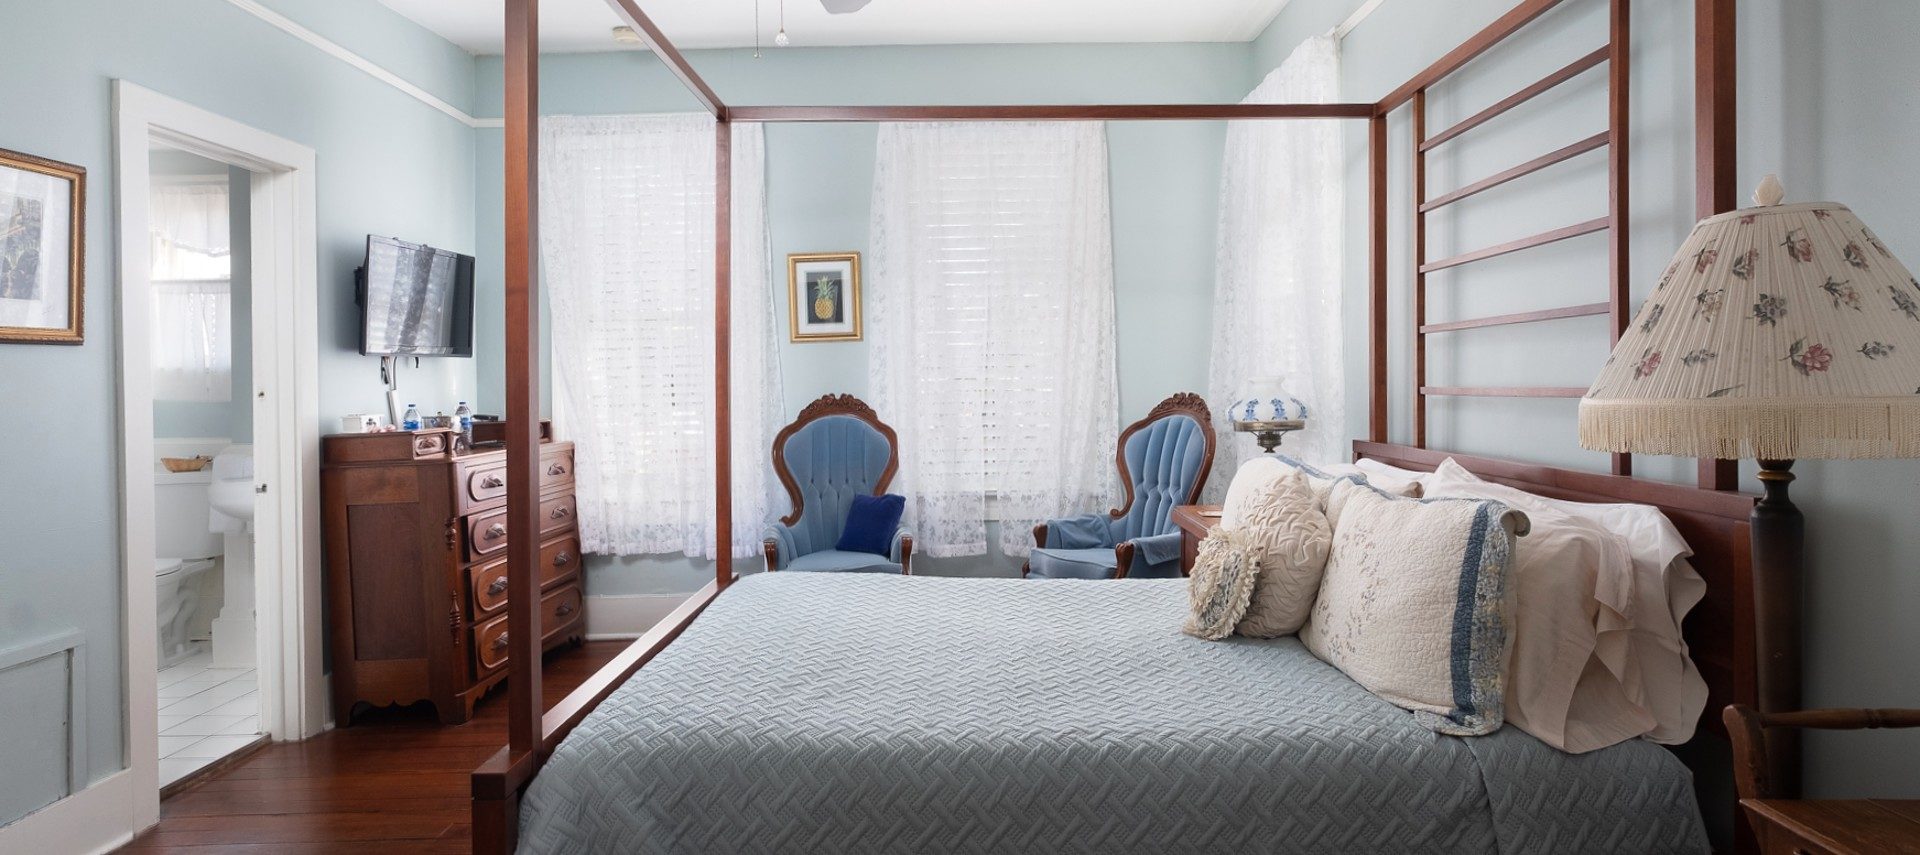 Bright bedroom with four poster bed, two blue sitting chairs, large windows and doorway into a bathroom